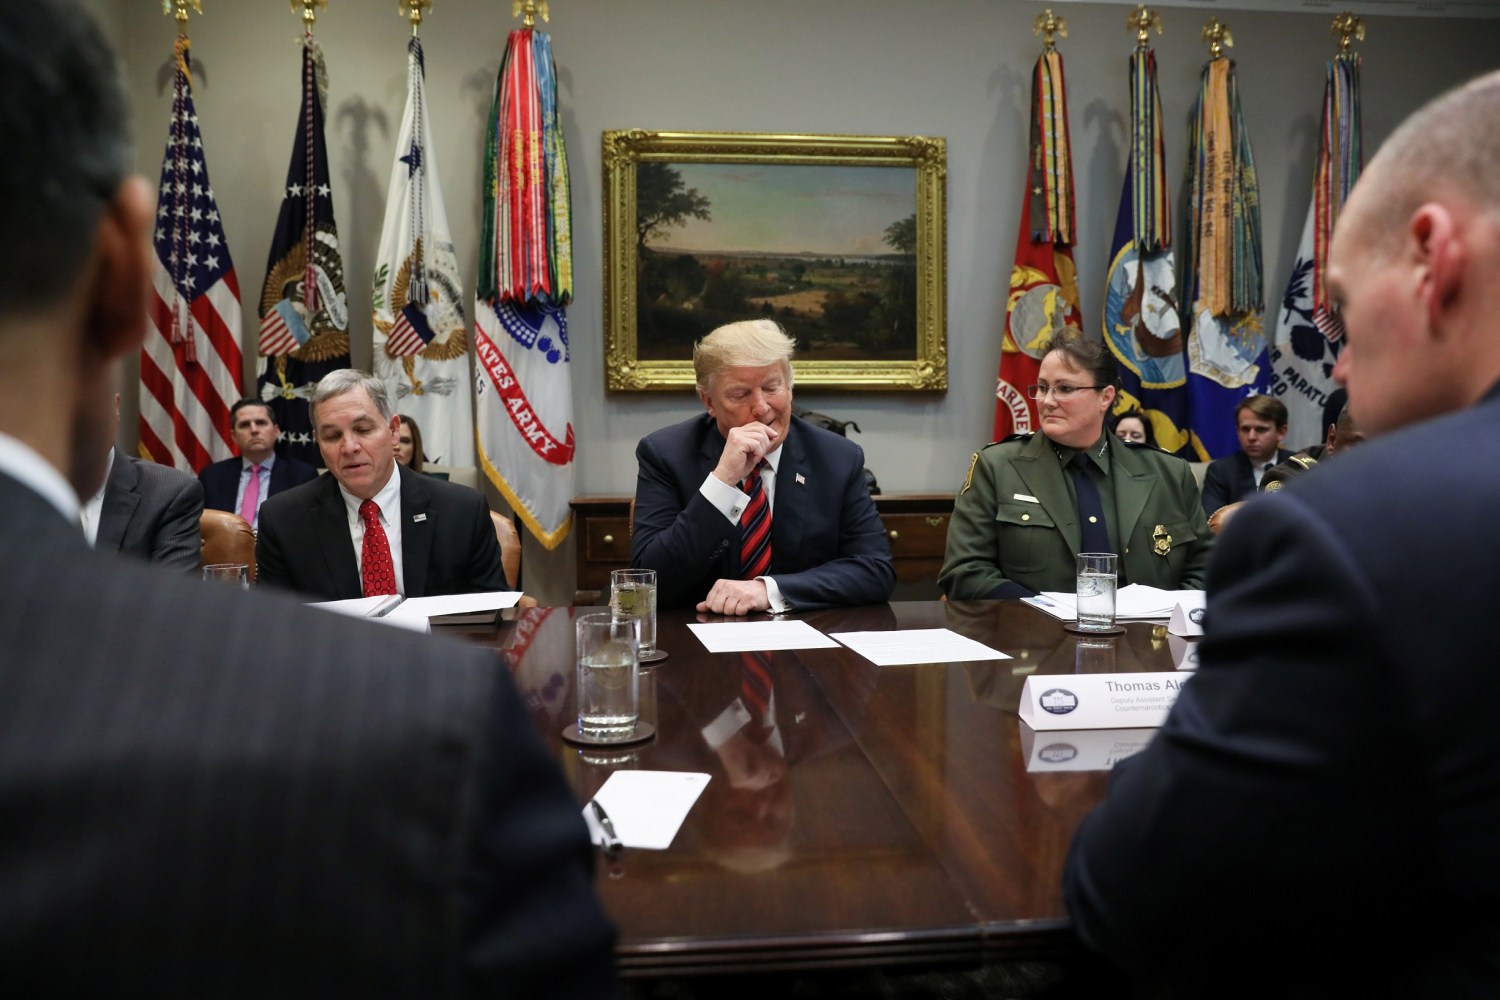 U.S. President Donald Trump, flanked by Houston High Intensity Drug Trafficking Area (HIDTA) Director Mike McDaniel and Chief of U.S. Border Patrol Carla Provost, holds a briefing on "drug trafficking on the southern border" in the Roosevelt Room at the White House in Washington, U.S. March 13, 2019.  REUTERS/Jonathan Ernst - RC1453617A40